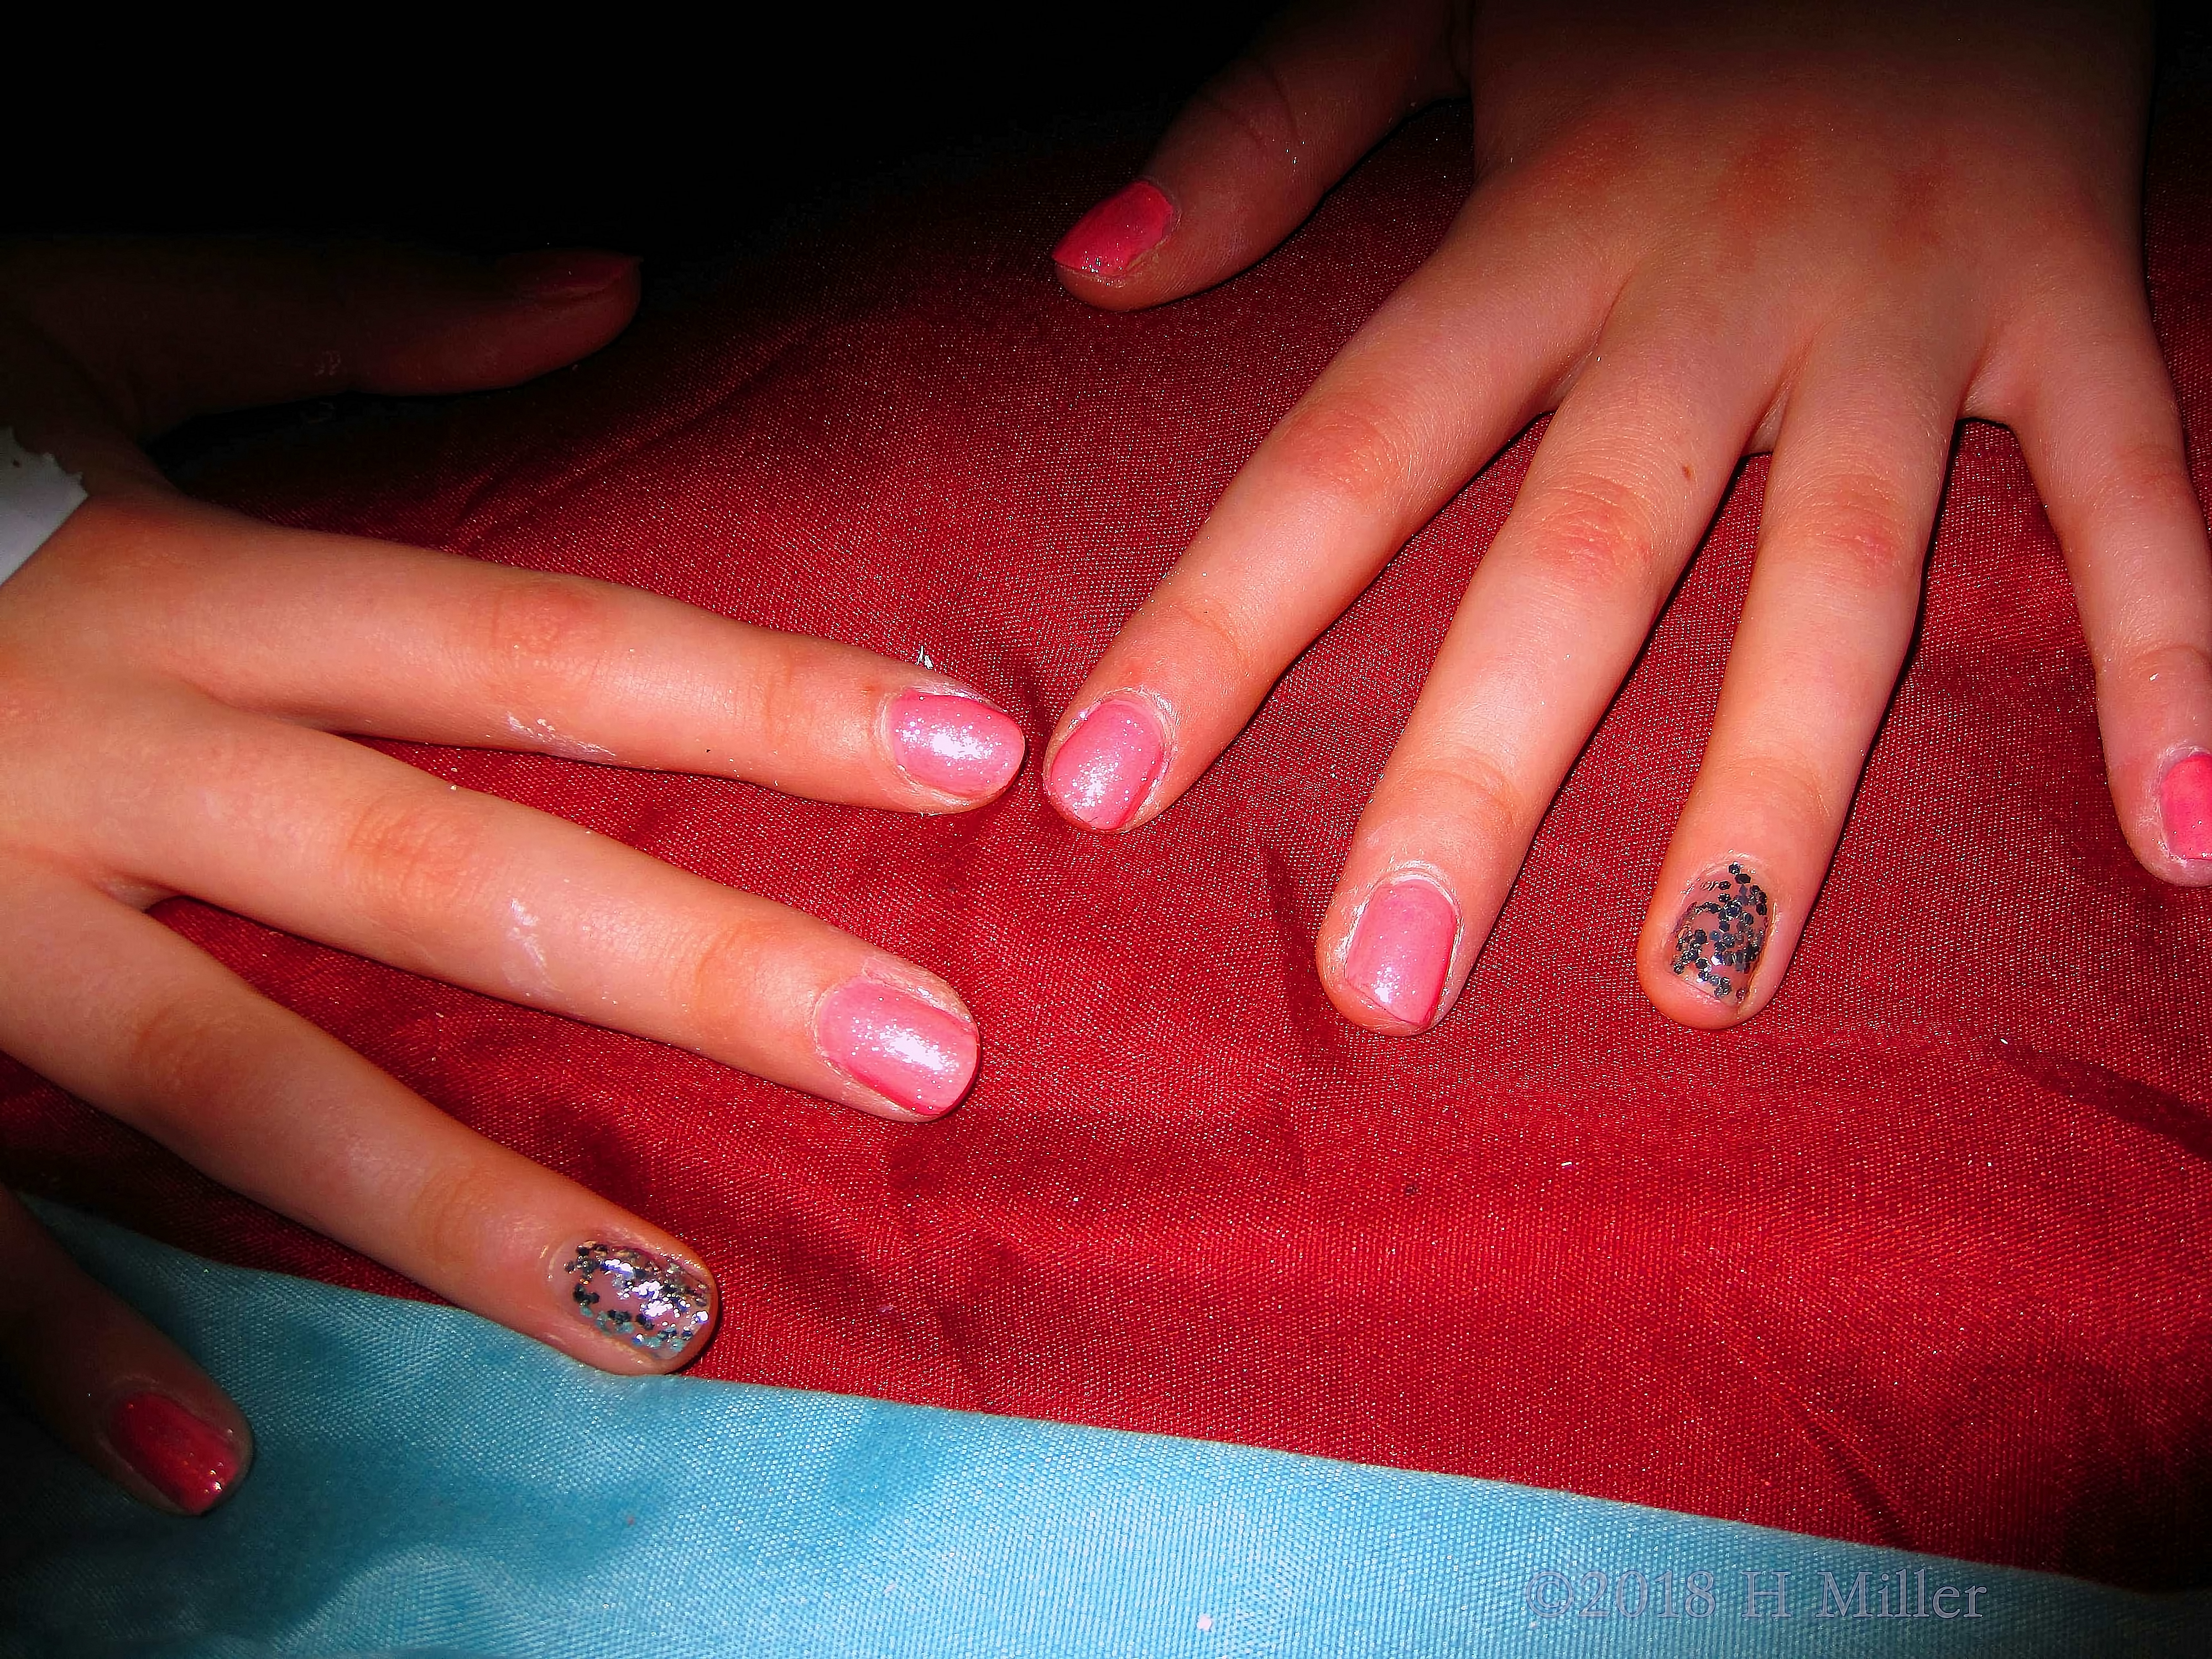 Mini Mani Sessions Give The Girls Beautiful Manicures To Show Off! 